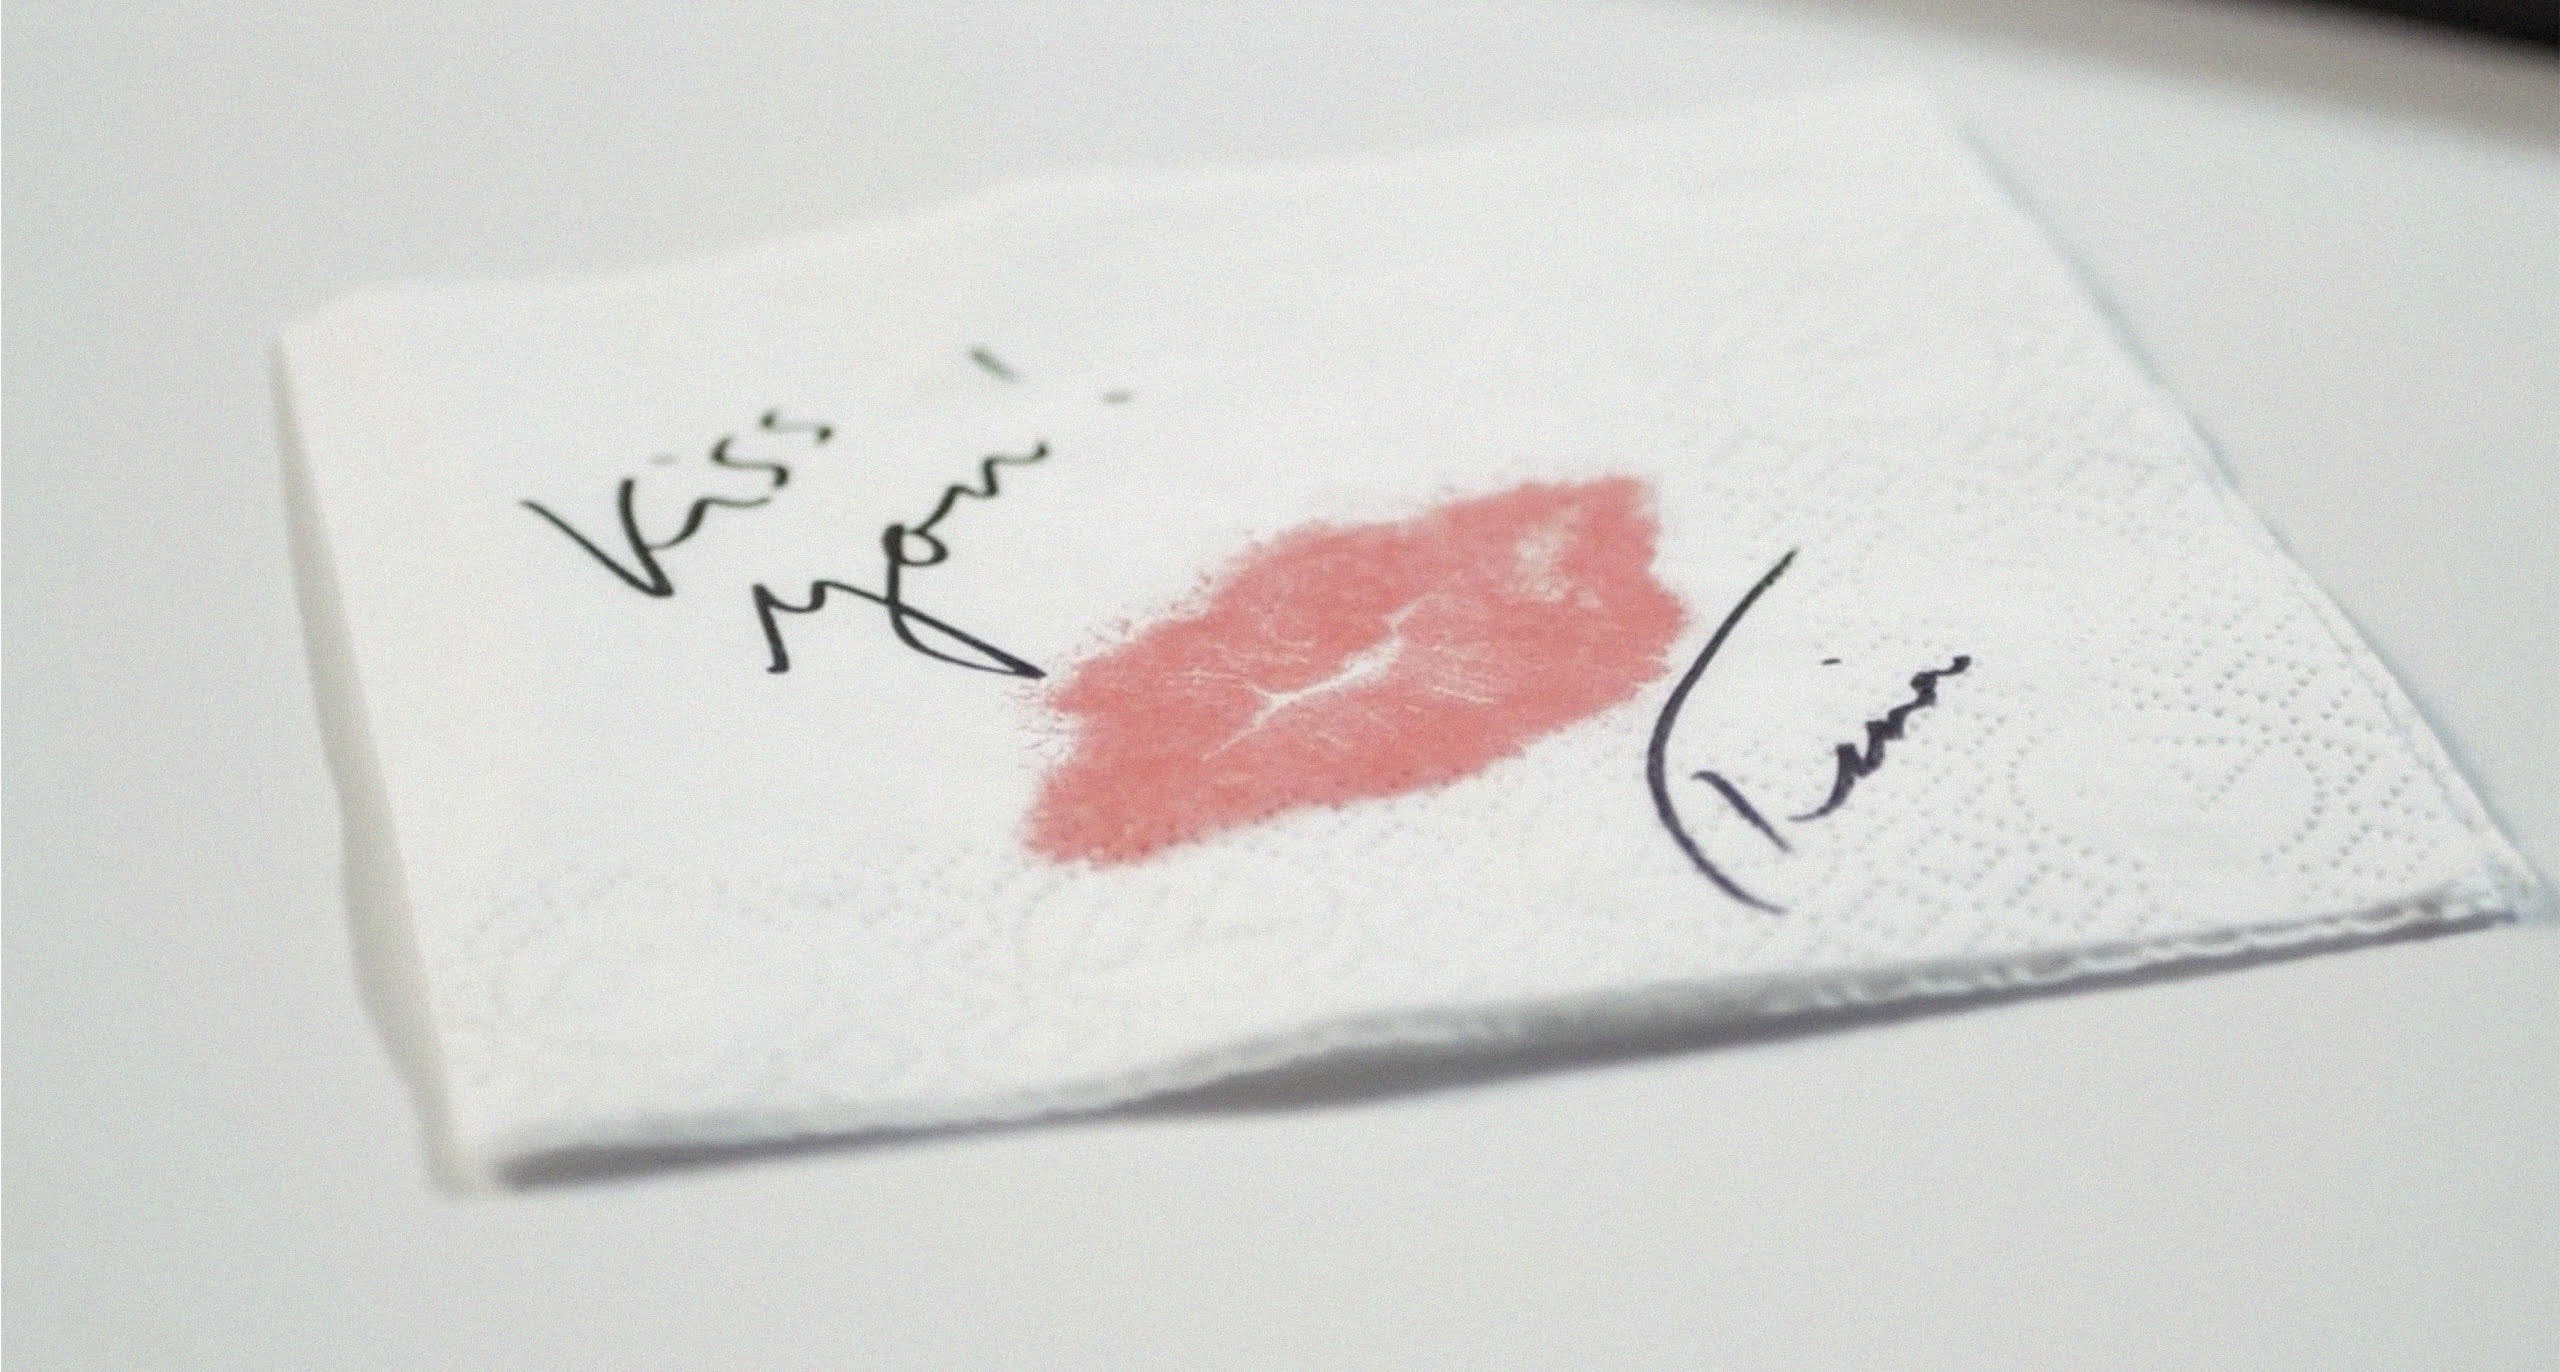 Napkin kissed and signed by Tina Turner